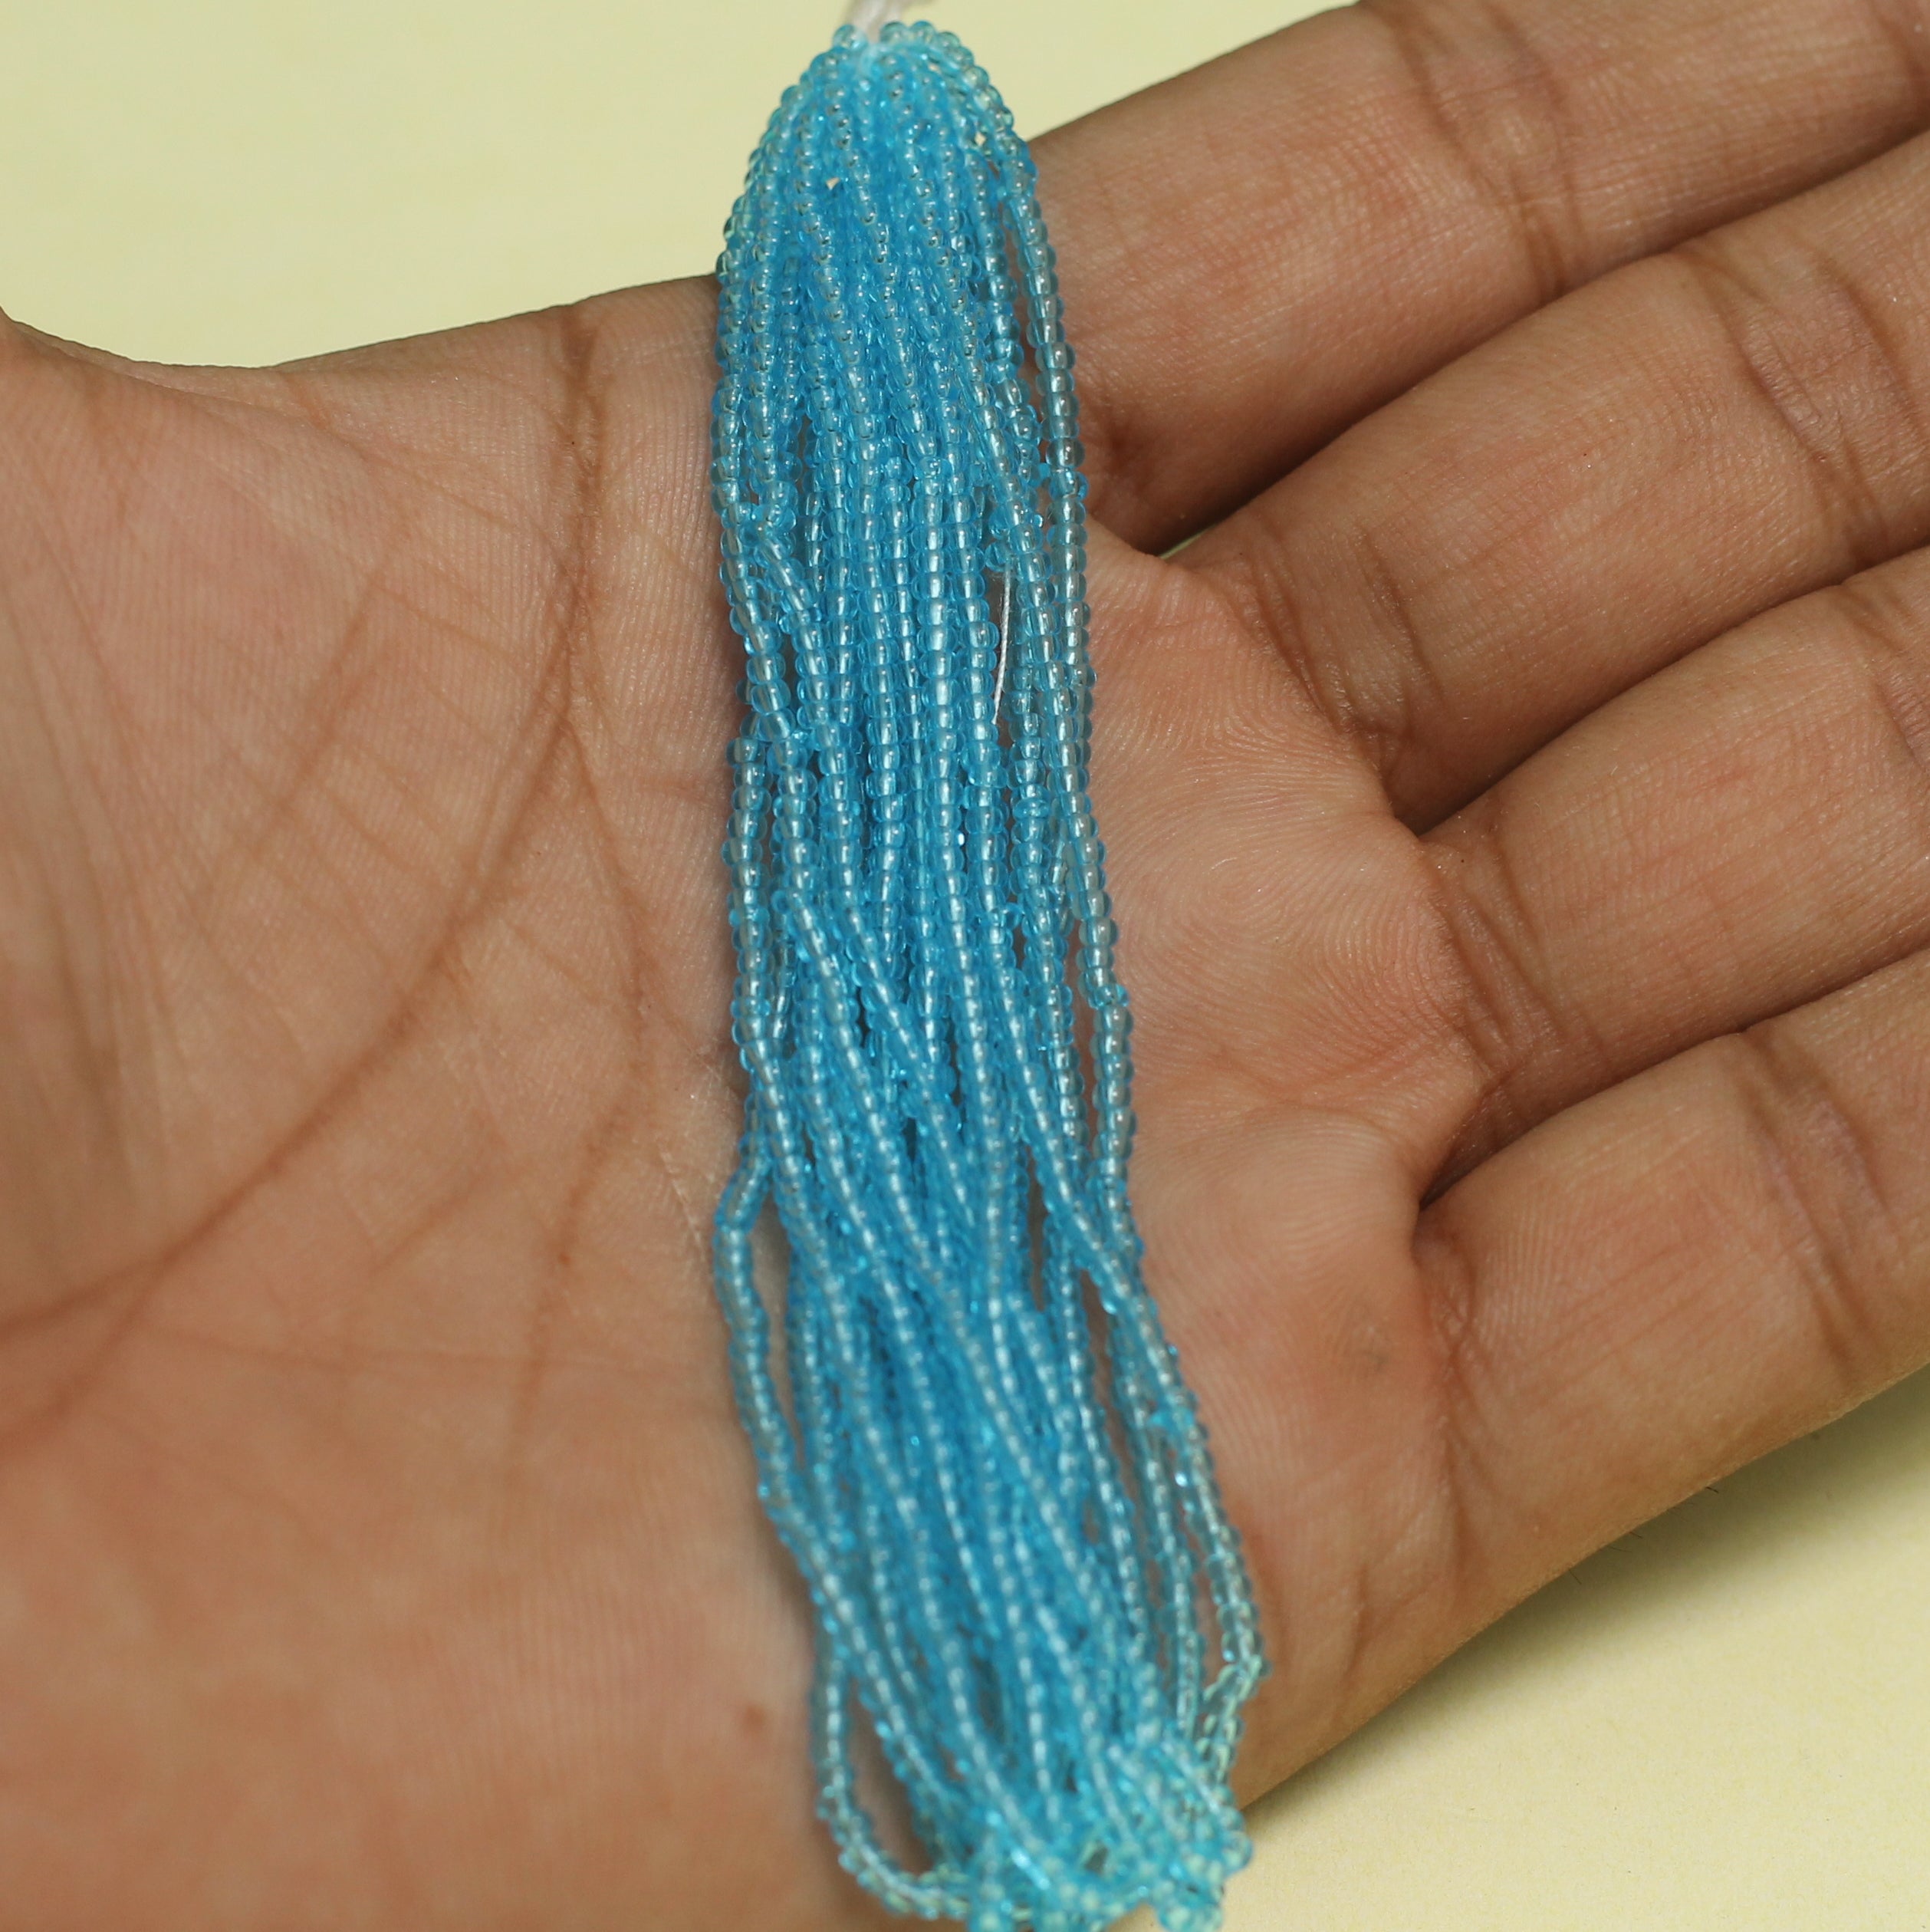 5 Bunch of Preciosa Seed Bead Strings Trans Turquoise